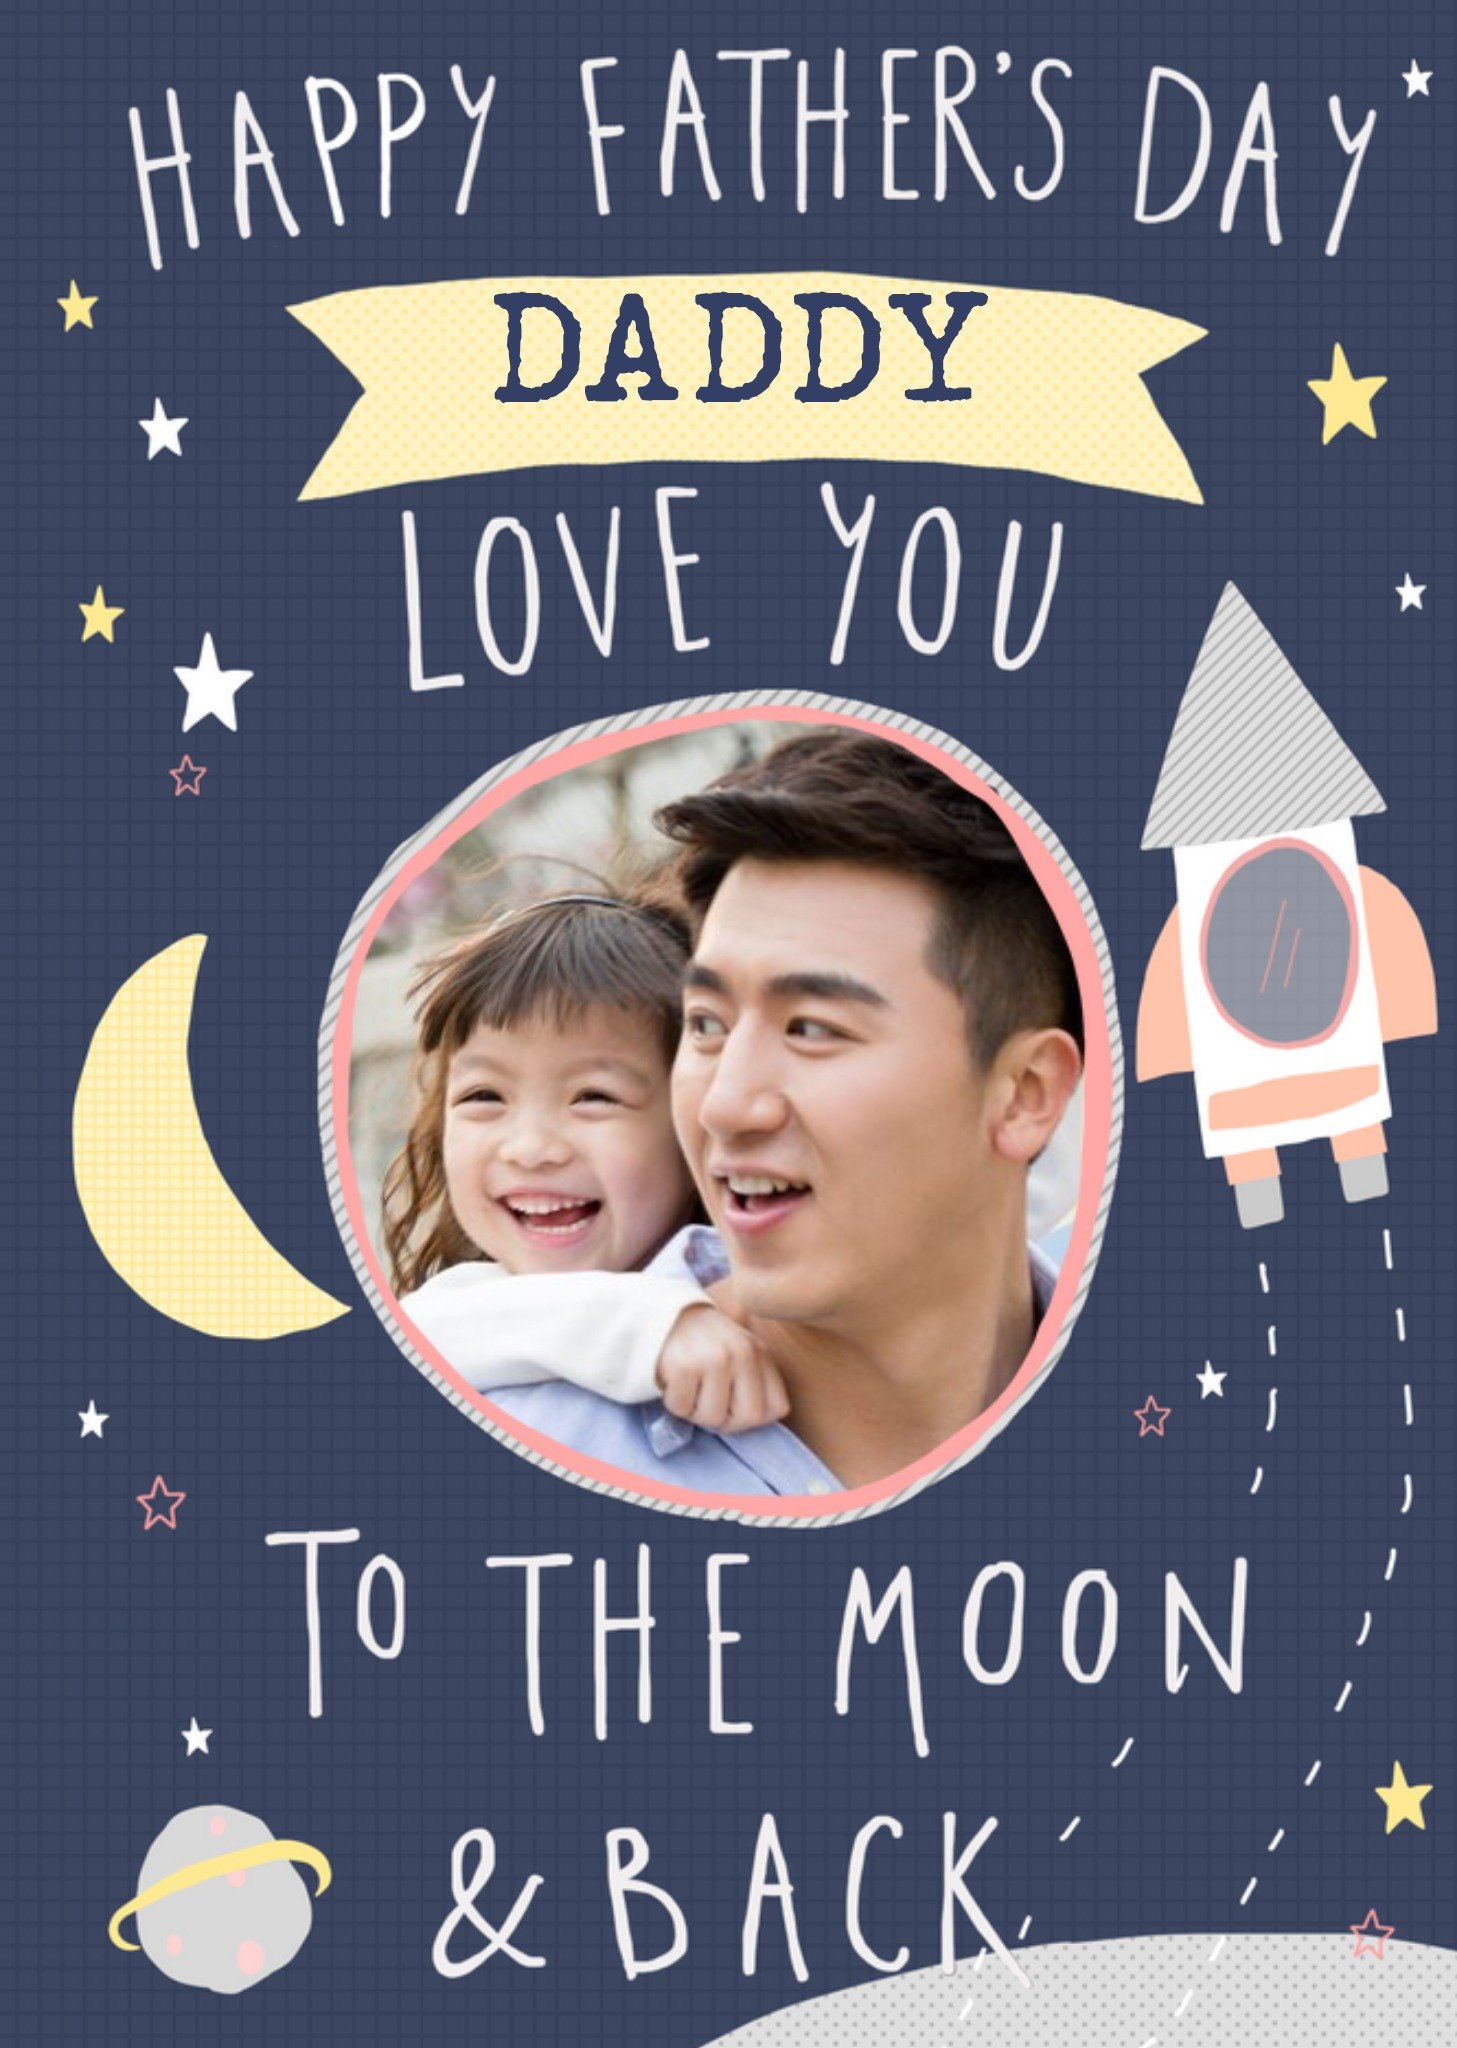 Moonpig Daddy Love You To The Moon & Back Cute Father's Day Photo Card, Large